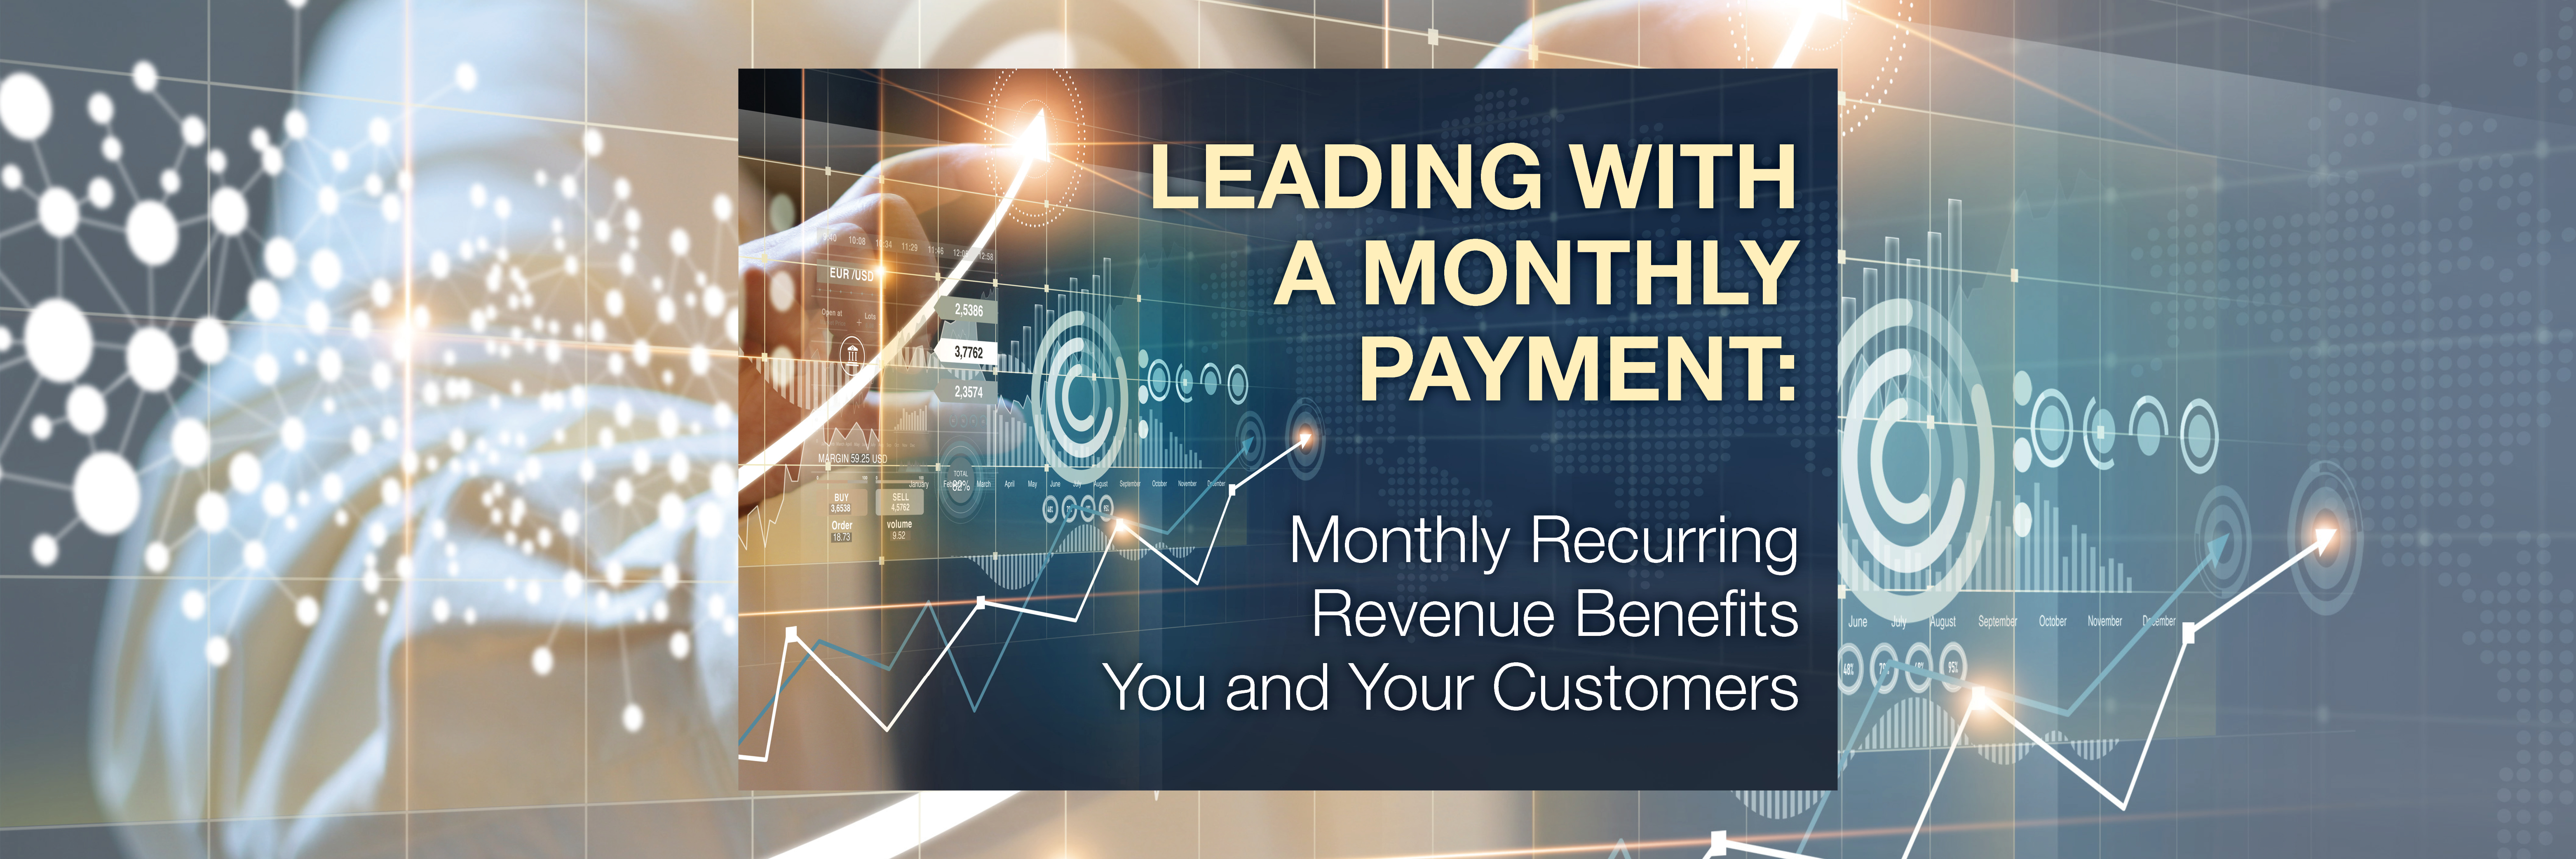 Leading with a Monthly Payment: Monthly Recurring Revenue Benefits You and Your Customers